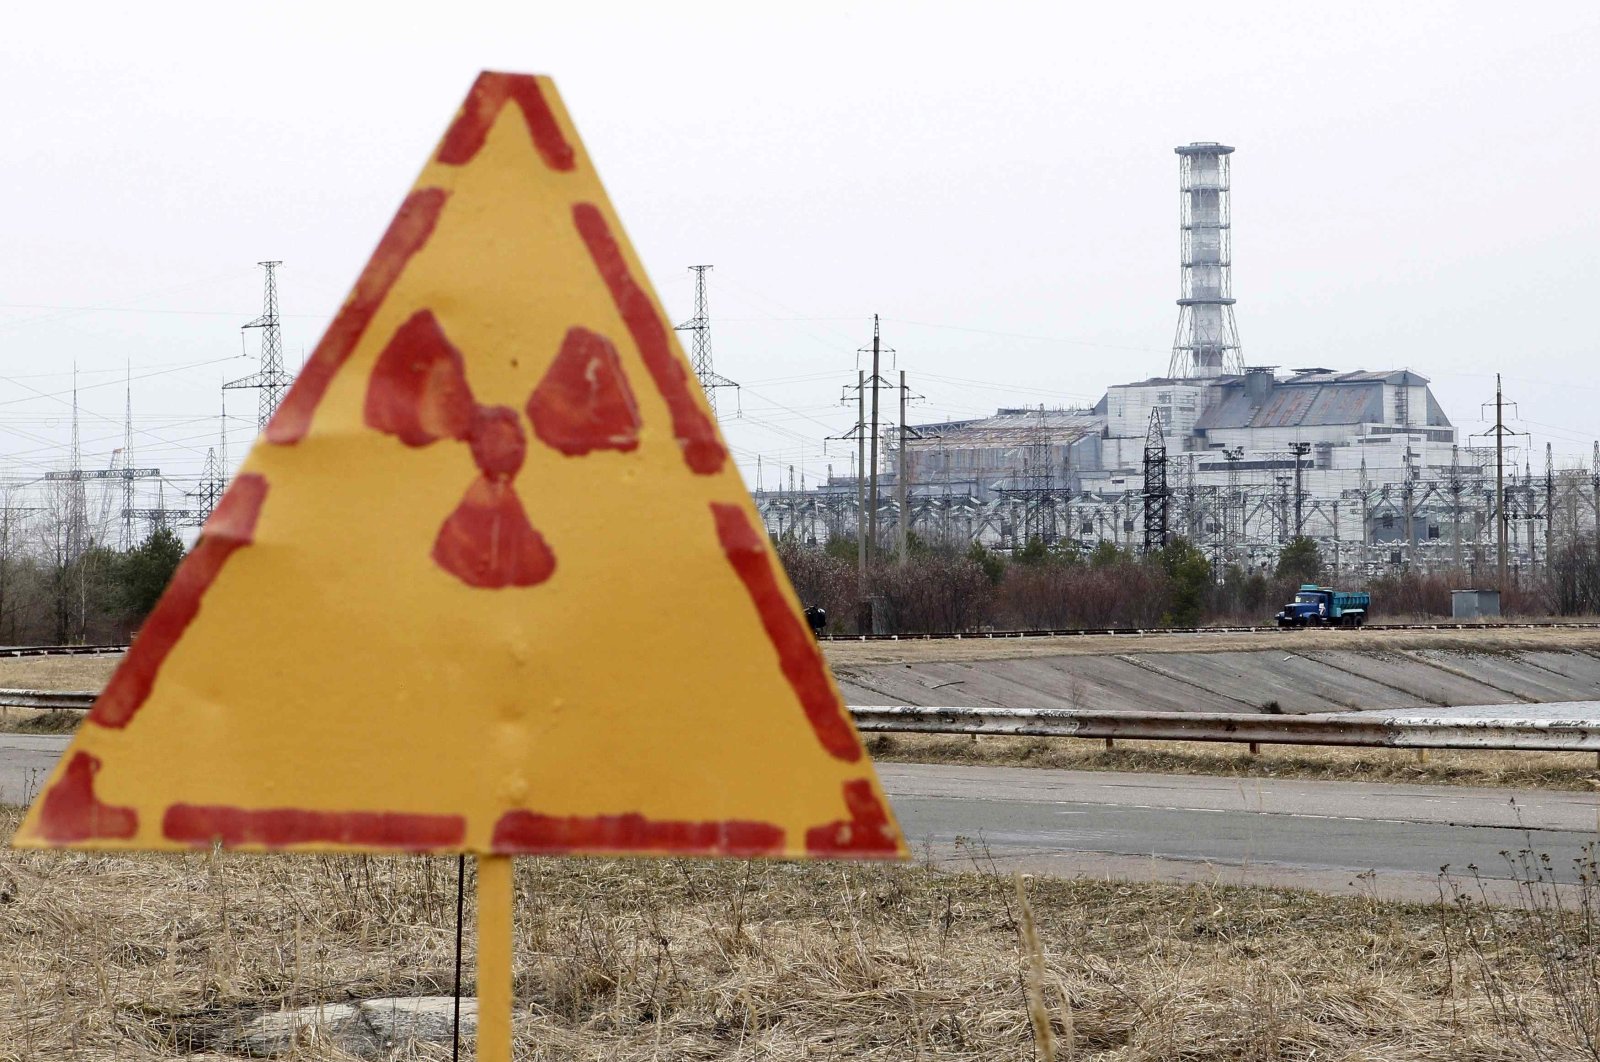 A radiation sign is seen, with a sarcophagus covering the damaged fourth reactor at the Chernobyl nuclear power plant in the background, April 4, 2011. (Reuters Photo)